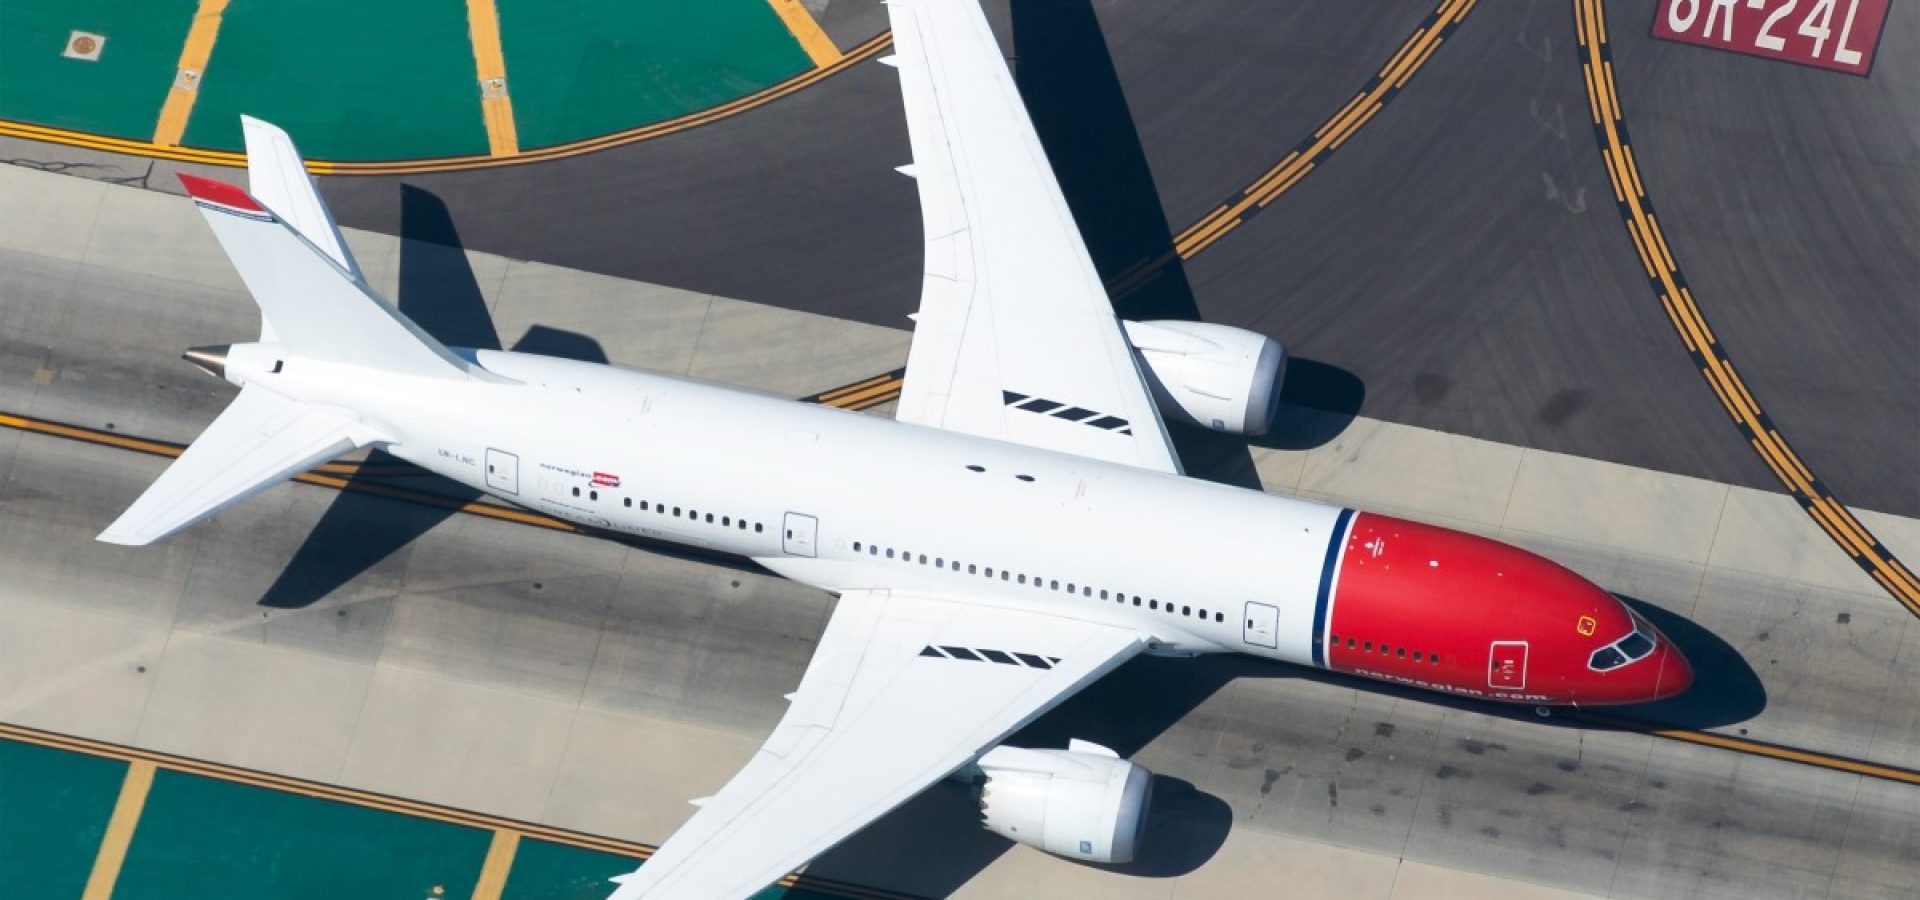 Norwegian Air and cryptocurrencies